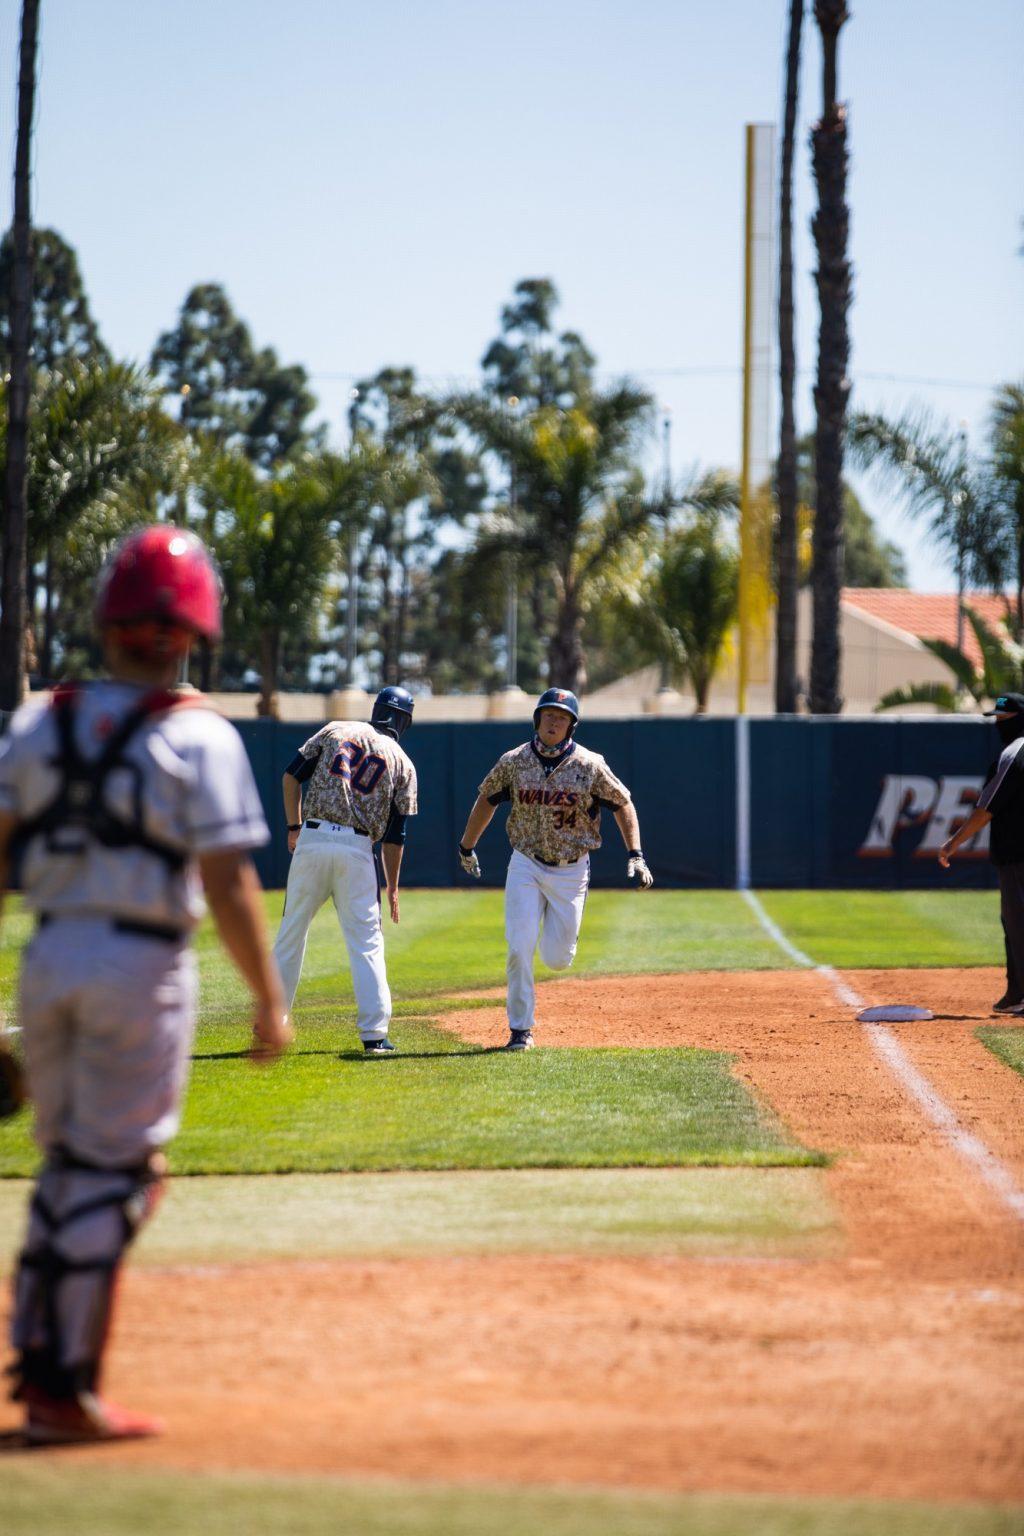 Pepperdine senior first baseman Justin Lutes rounds third after blasting a 375-foot home run to right field Saturday in Malibu. Lutes' homer put the Waves ahead 2-1 en route to a series-clinching 7-2 win.